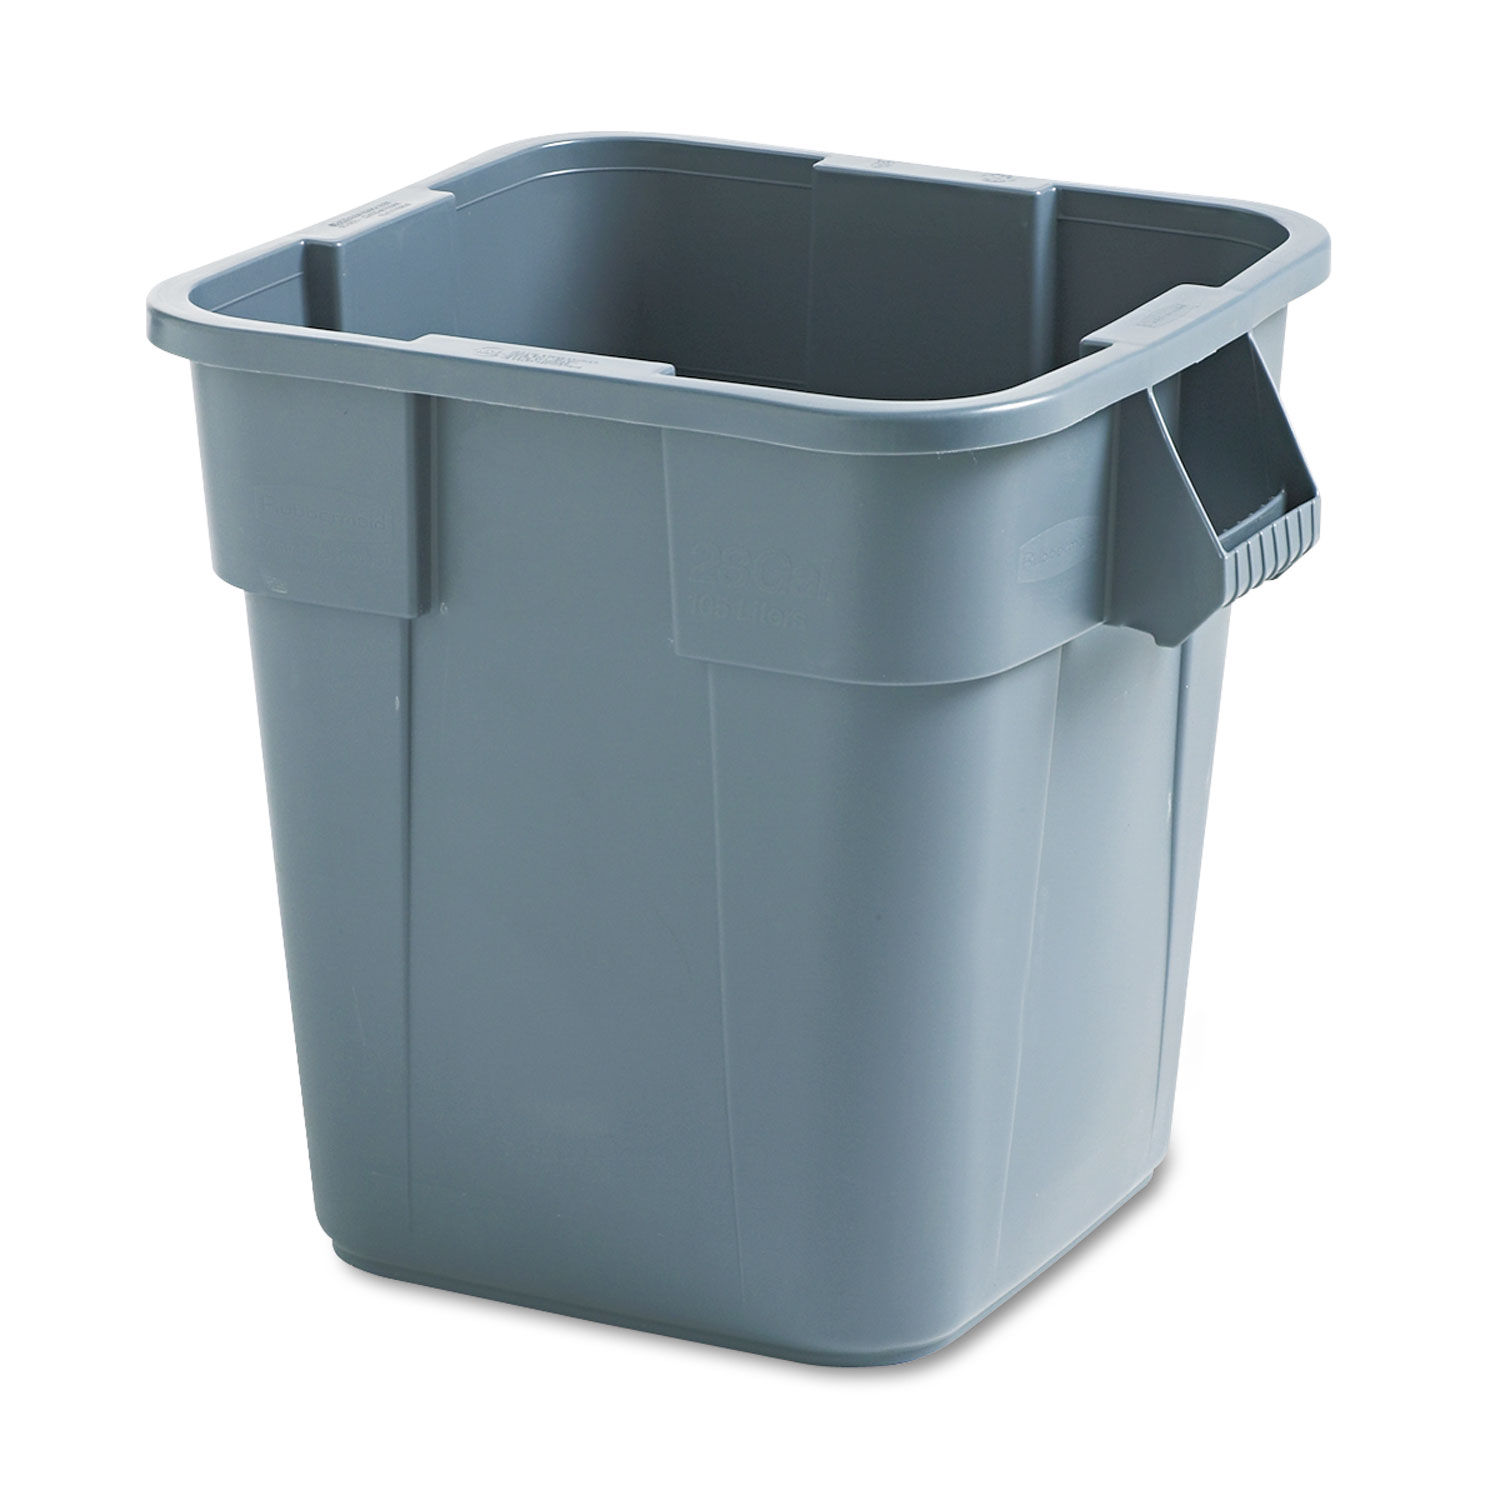  Rubbermaid Commercial FG352600GRAY Brute Container, Square, Polyethylene, 28 gal, Gray (RCP352600GY) 